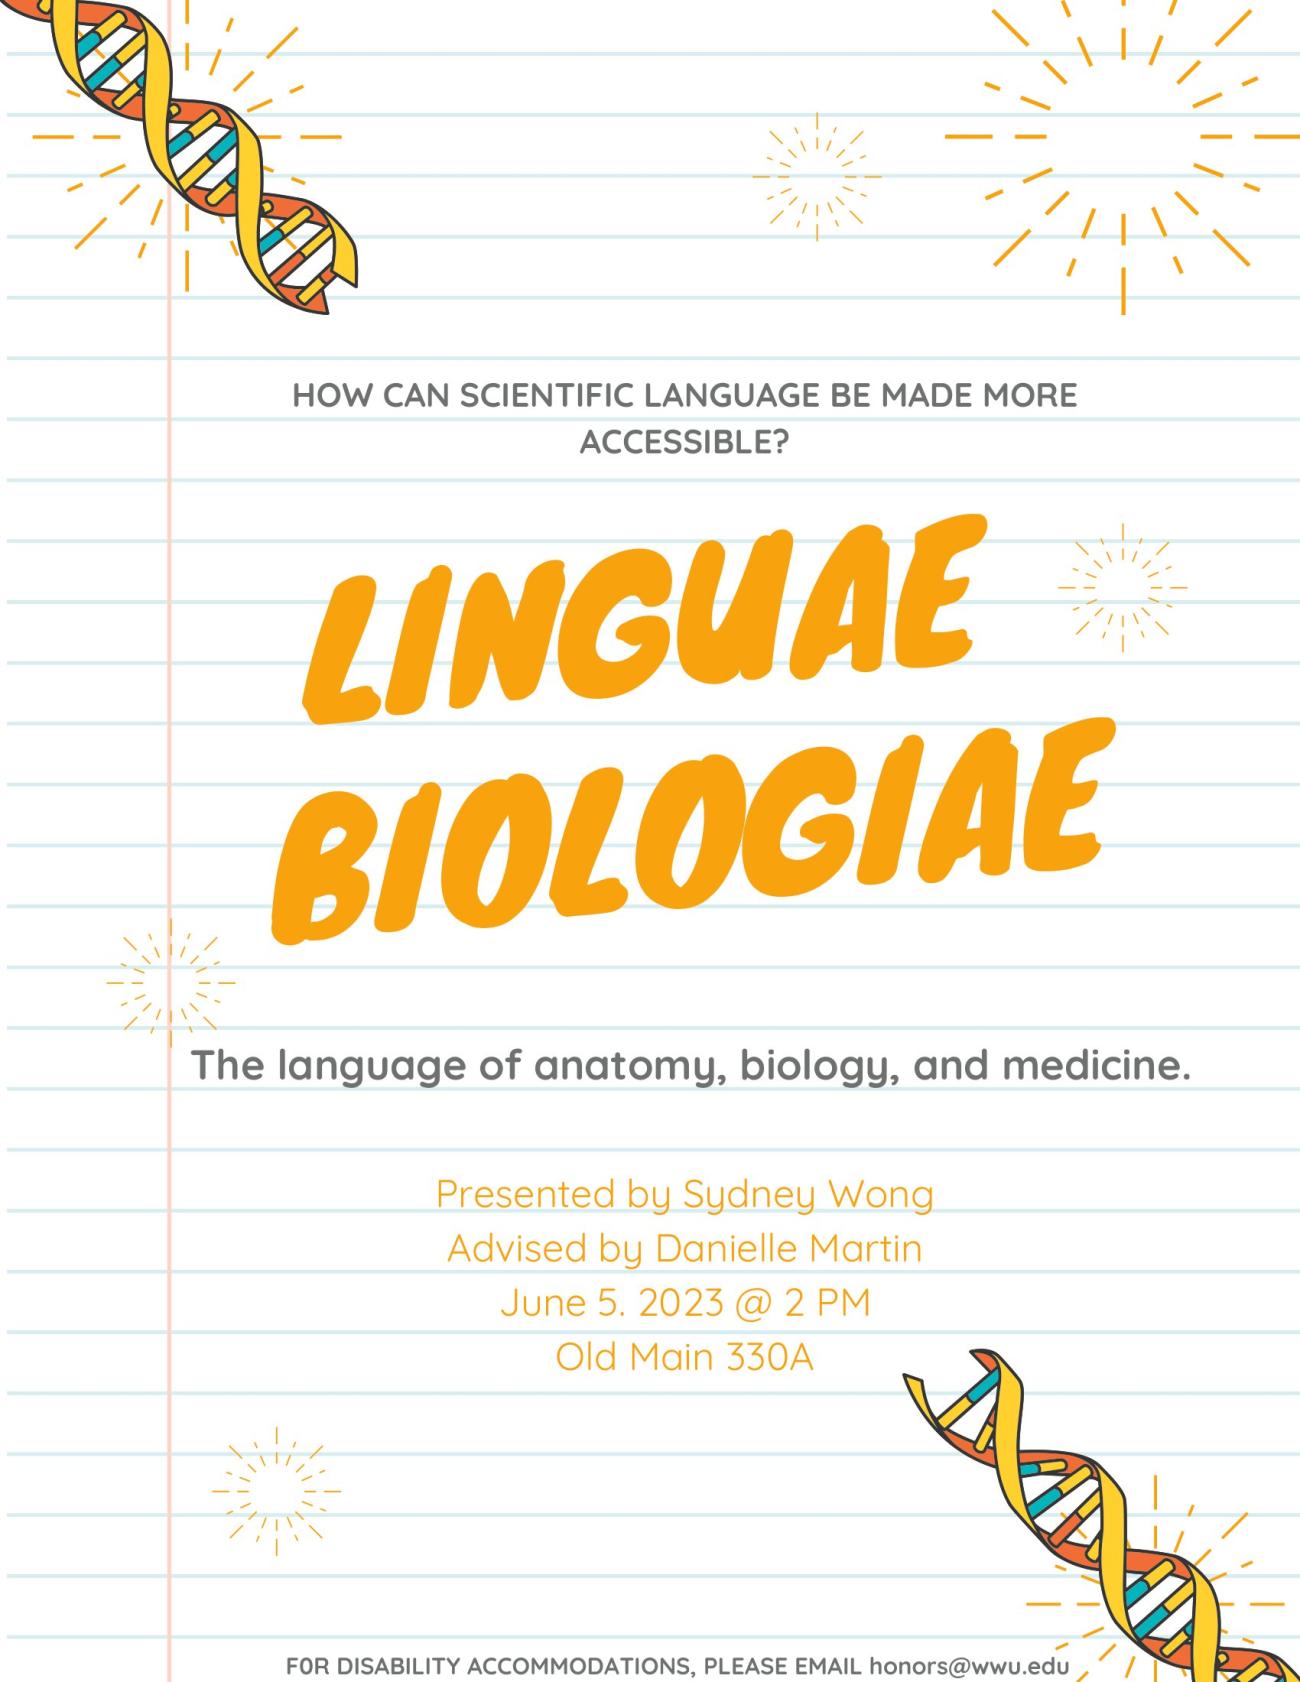 A poster with a notebook-lined paper background. Cartoon illustrations of DNA in the top and bottom corners. Title in large orange text: "How can scientific language be made more accessible? Linguae Biologiae. The language of anatomy, biology, and medicine." Smaller orange texts reads "Presented by Sydney Wong, advised by Danielle Martin. June 5, 2023 at 2 PM. Old Main 330A. For disability accommodations, please email honors@wwu.edu."